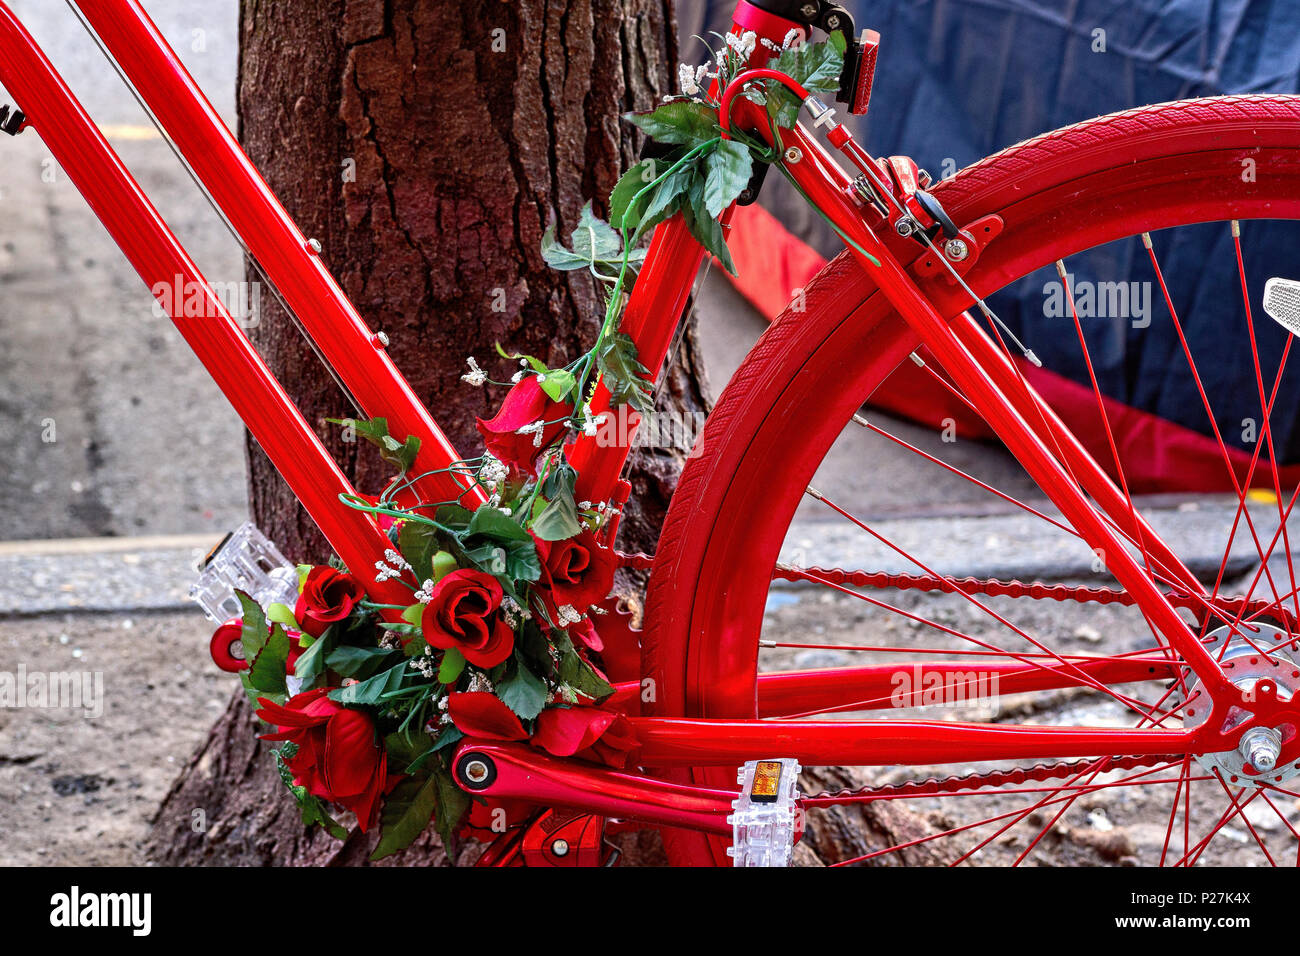 New York City, Soho, Manhattan.  Close Up View of a flower decorated red delivery bicycle, parked on a Soho, Manhattan, NYC, Street. Stock Photo